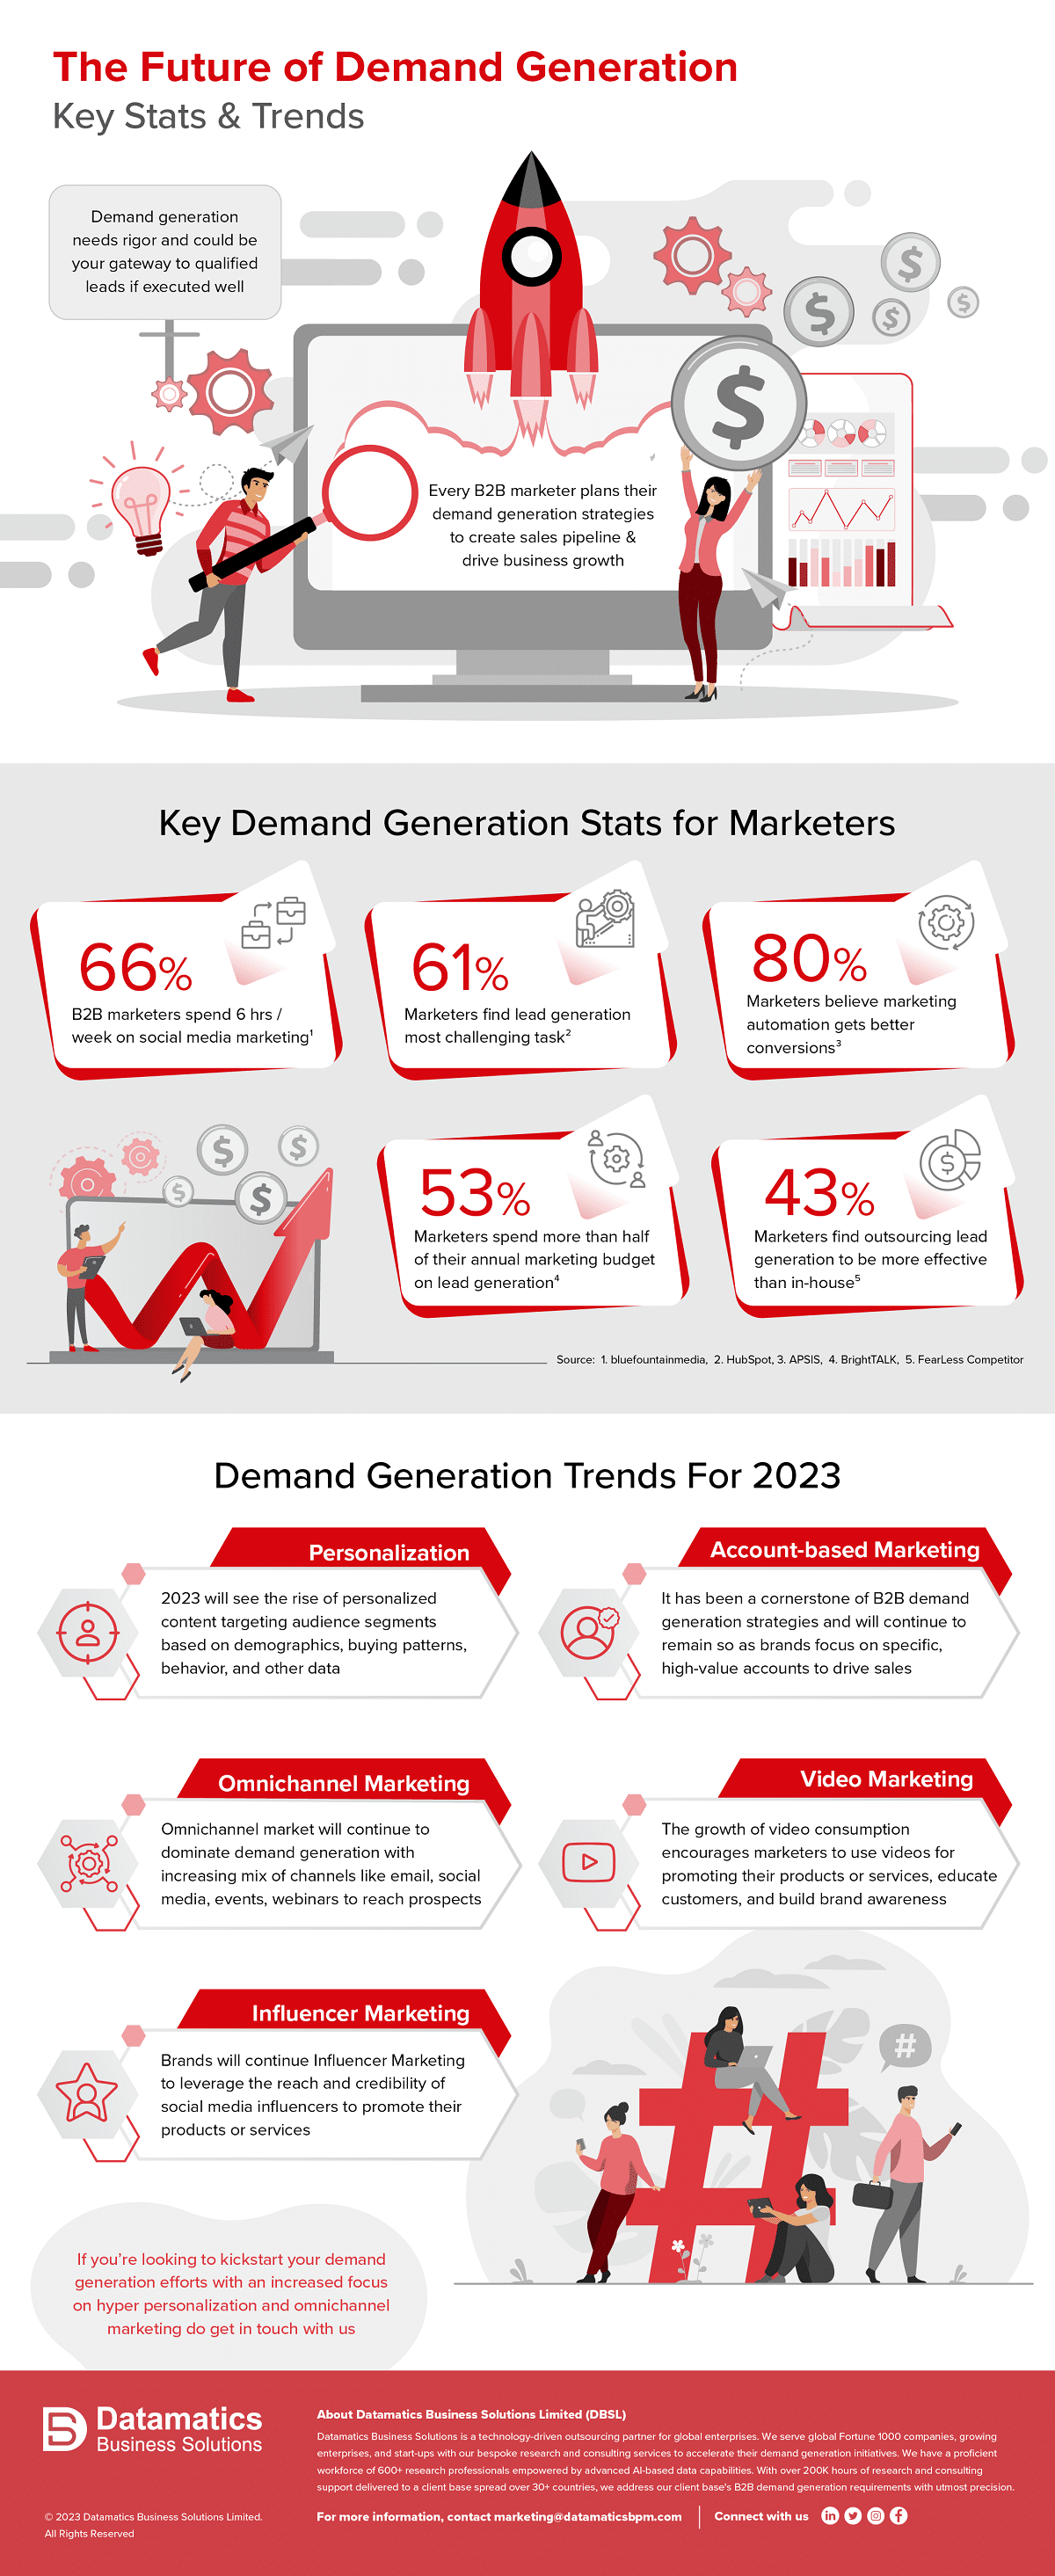 The Future of Demand Generation Key Stats & Trends